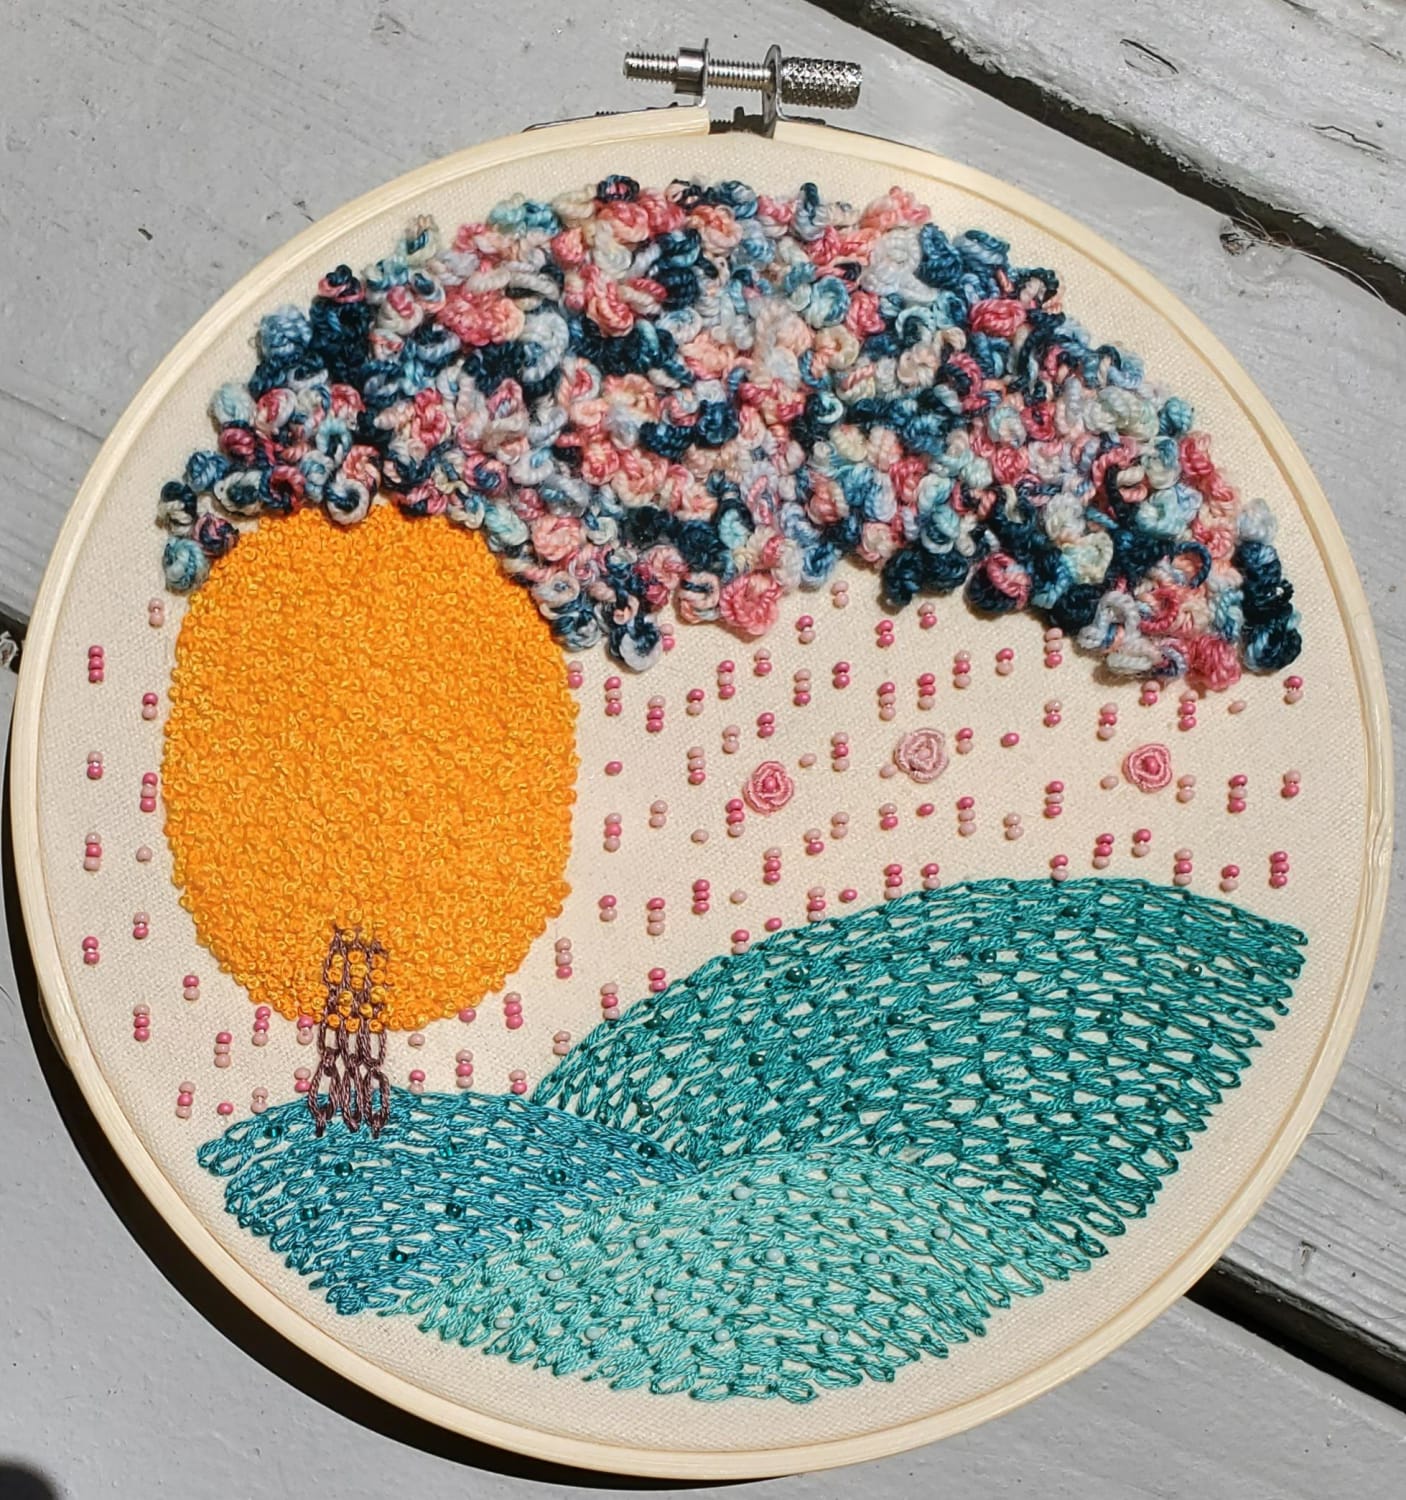 My second finished piece. Thinking of summer rains 🌧